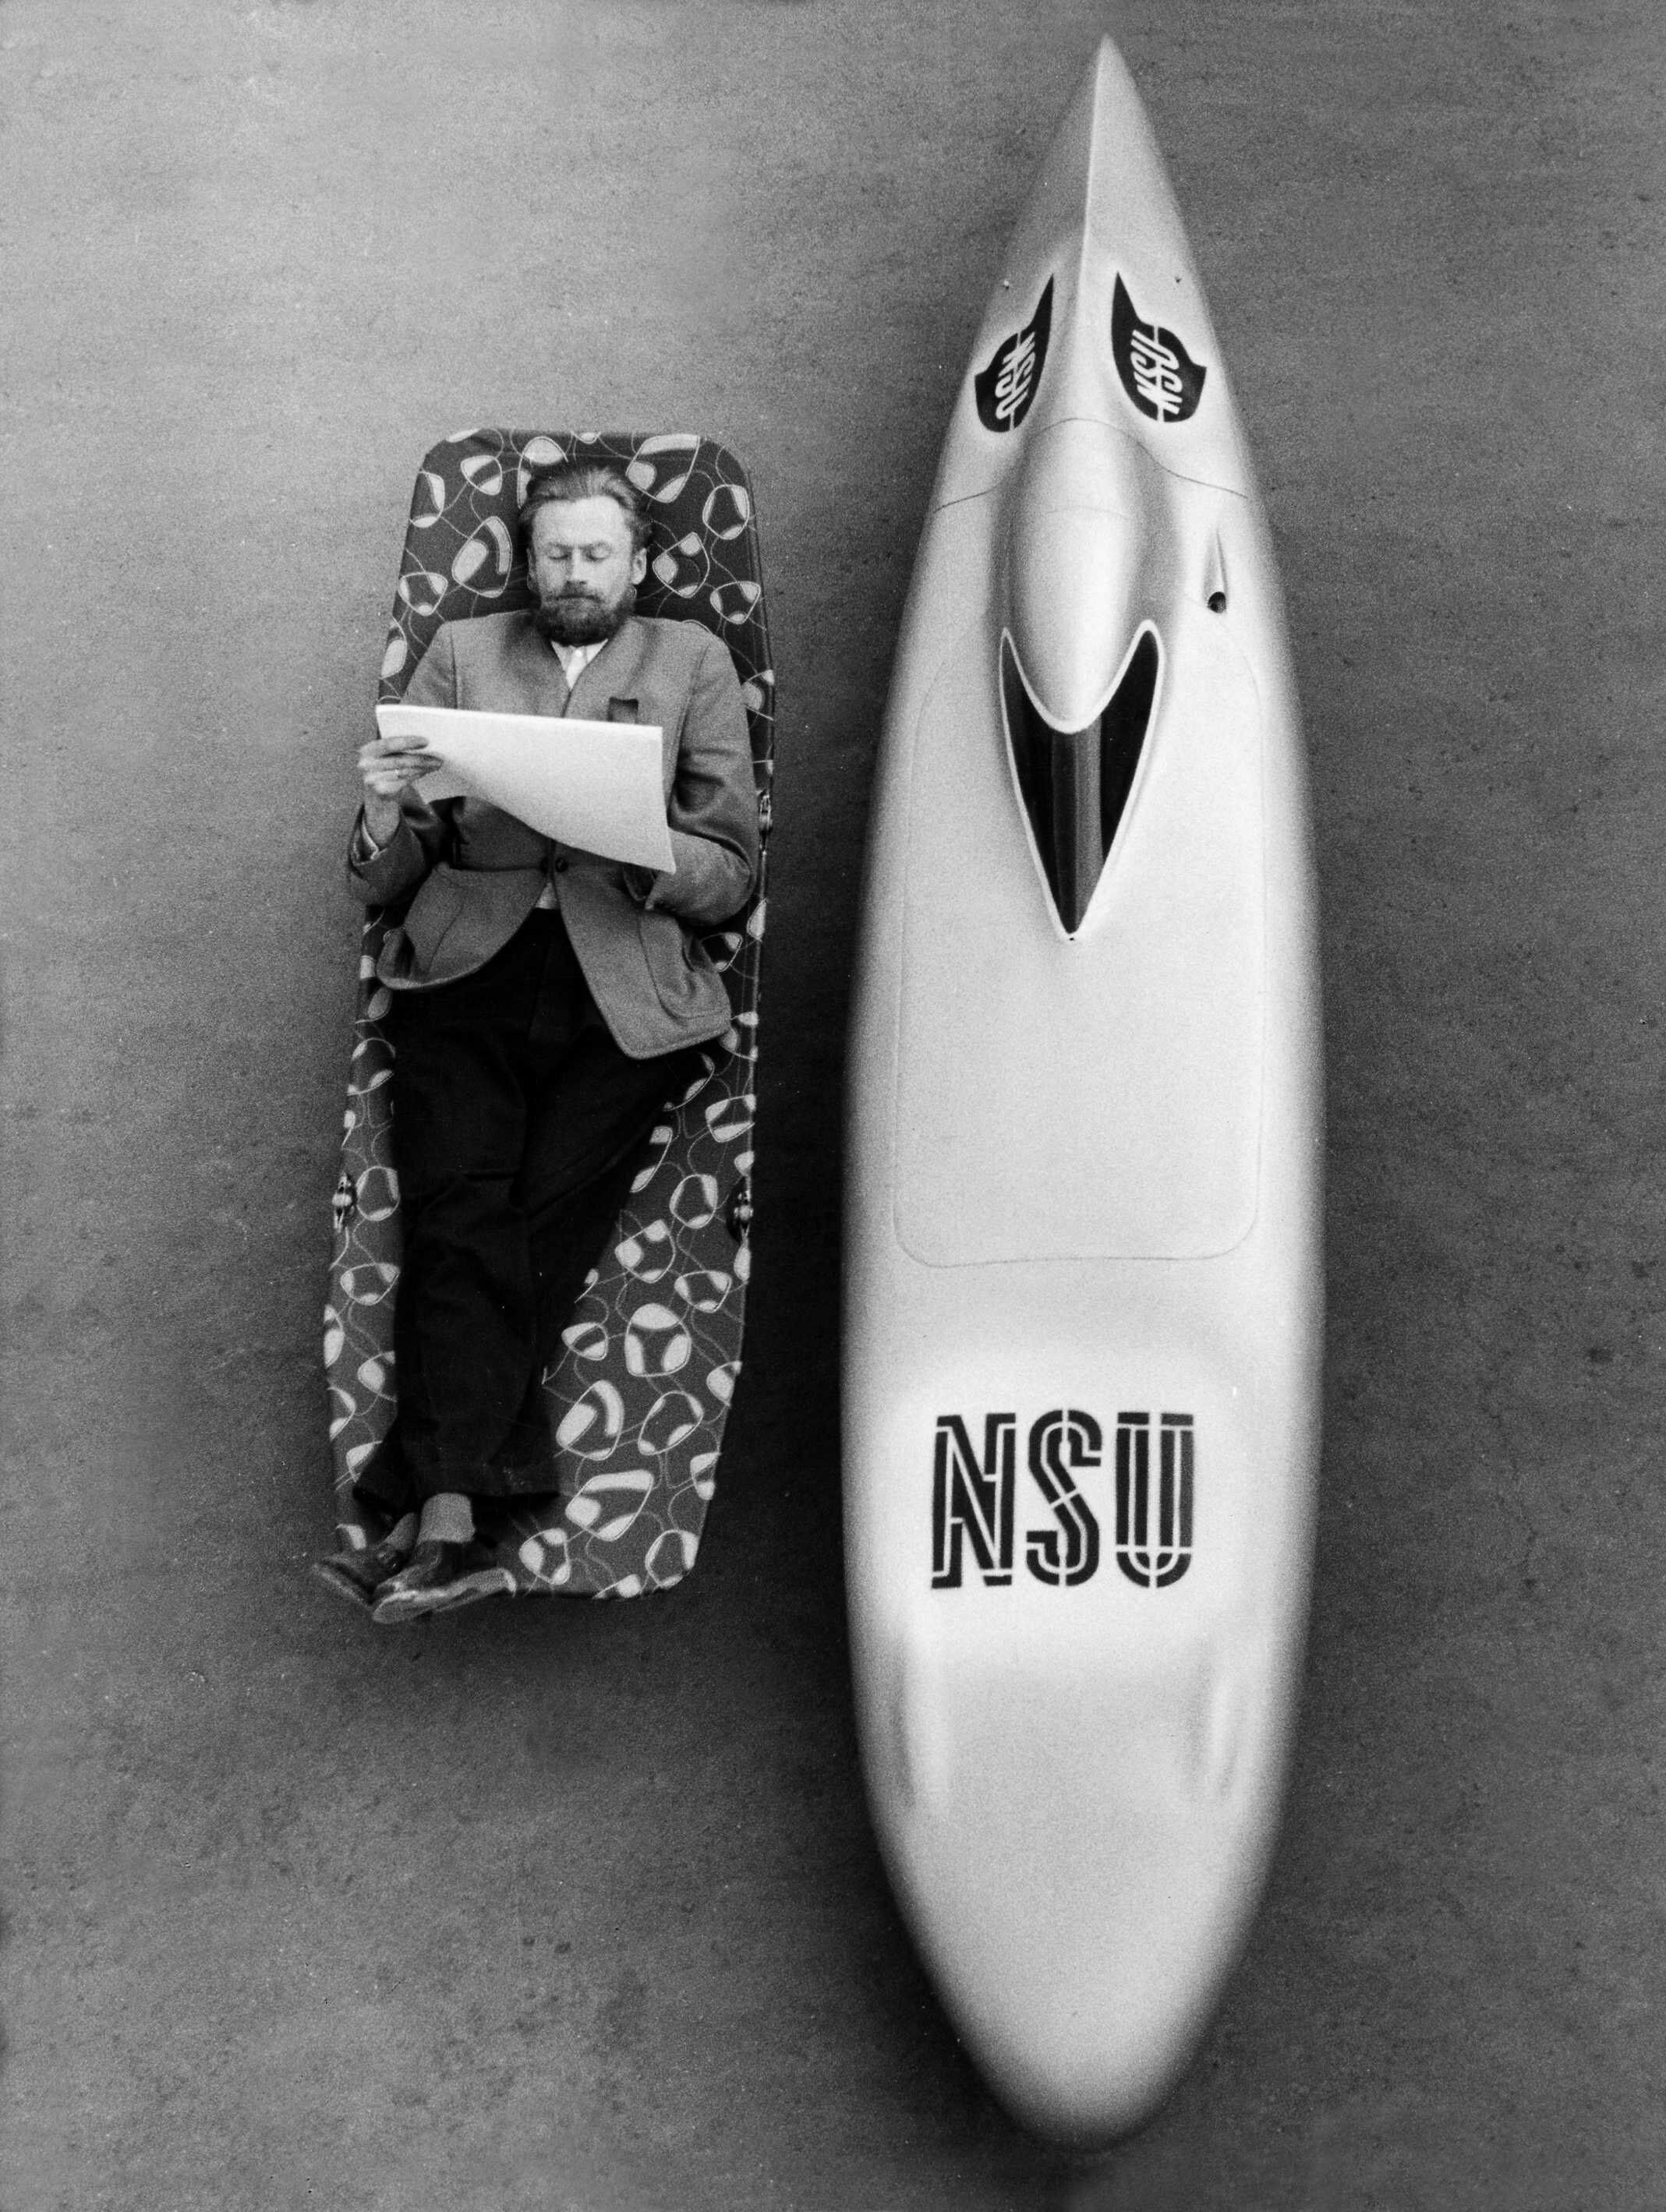 The "Flying Deckchair": the graphic artist Gustav Adolf Baumm designed an especially aerodynamic integral fairing with the assistance of the NSU engineers and named it the "Baumm Deckchair". In 1954 he broke 11 existing world records with it